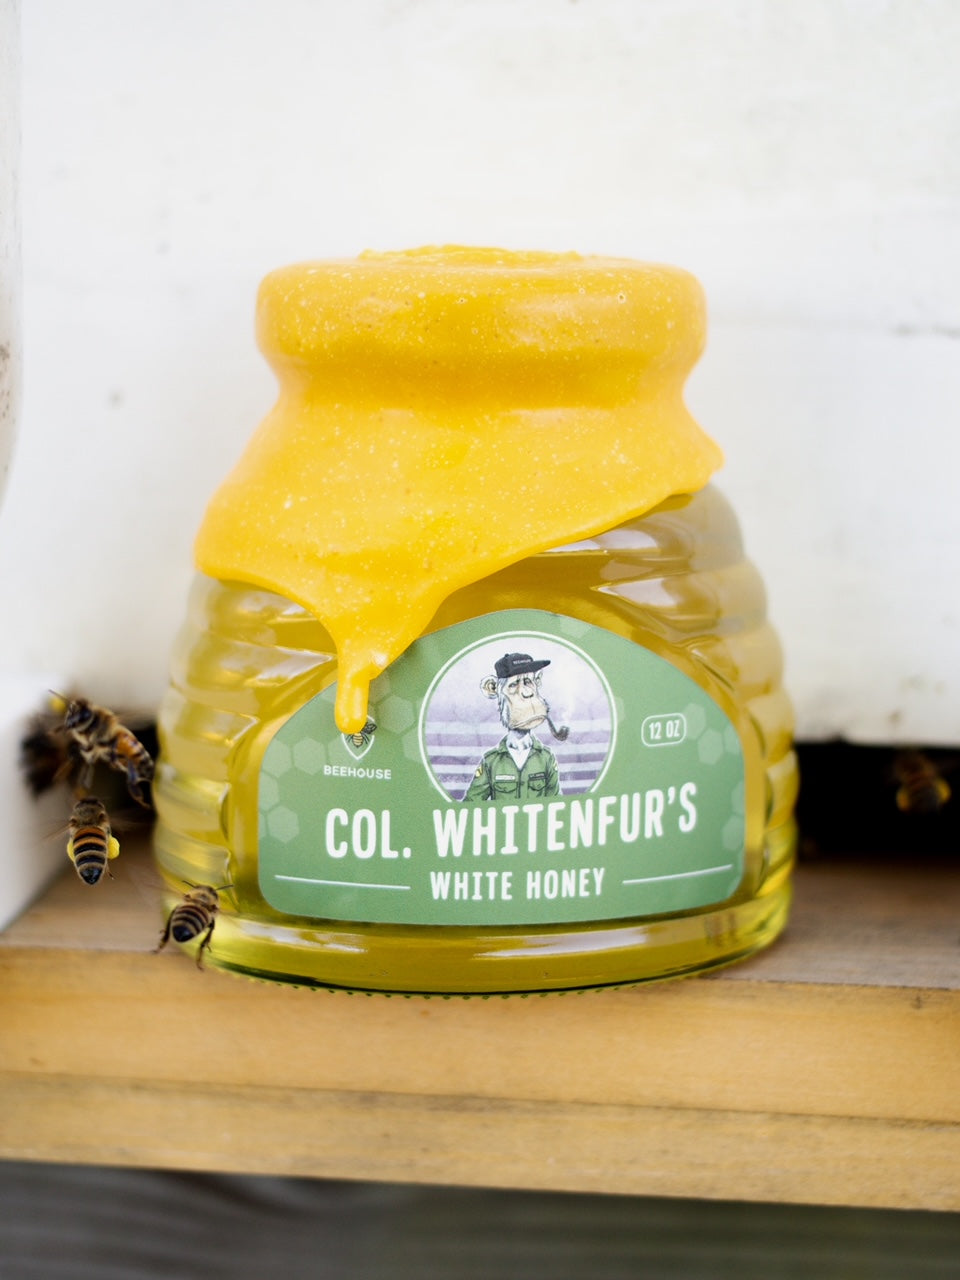 Limited Edition Colonel Whitenfur White Honey and NFT